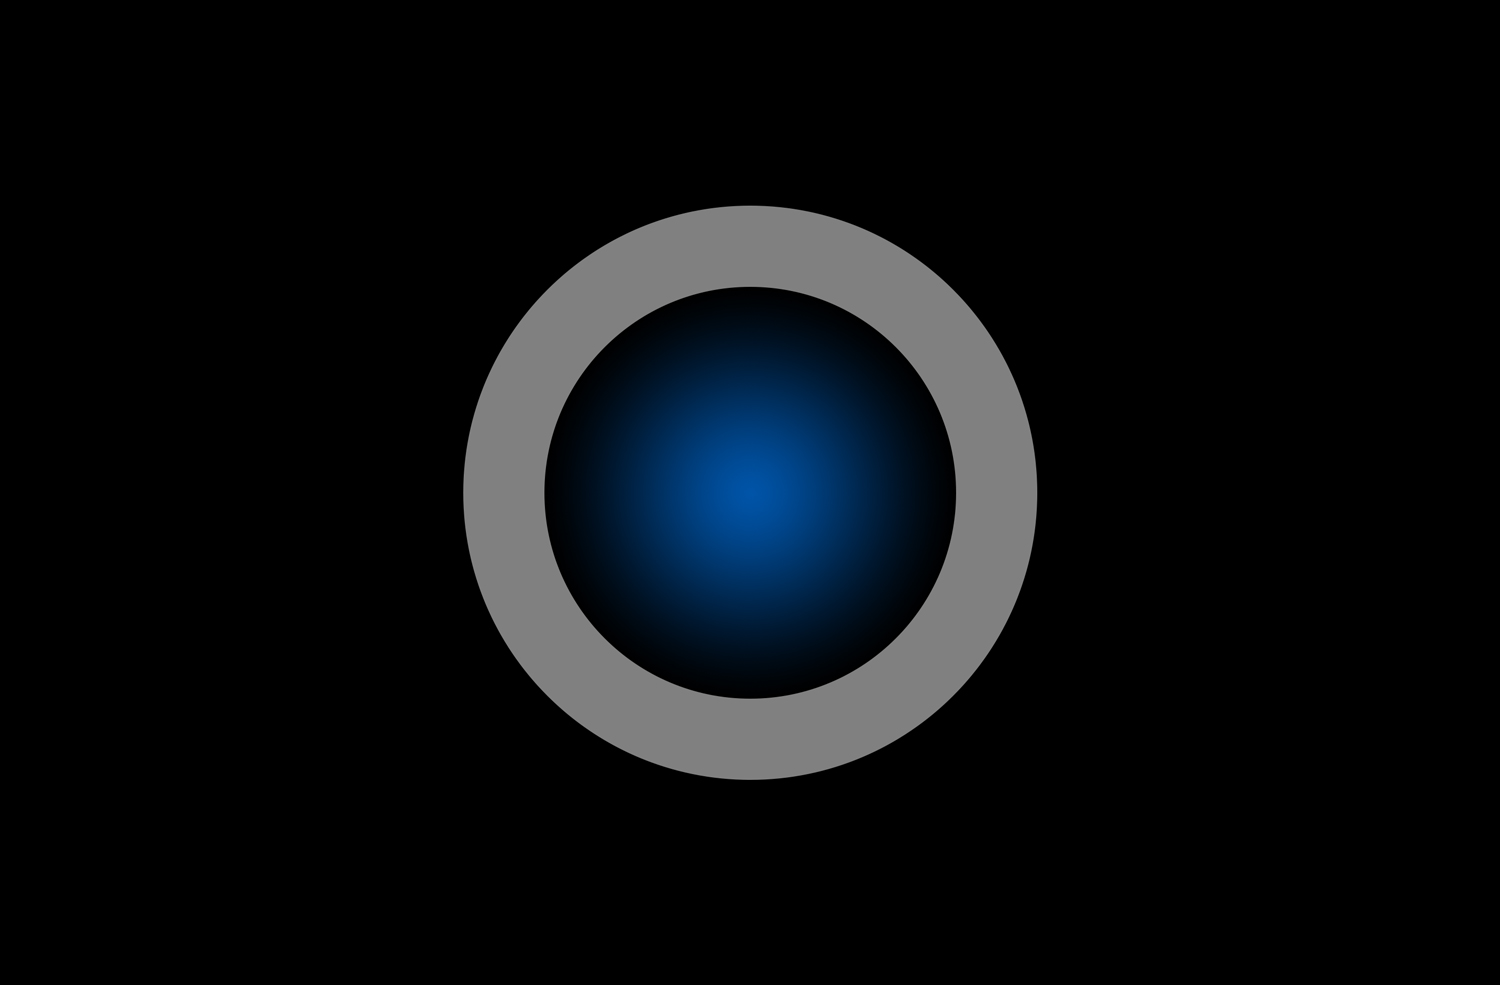 Custom blue-to-black gradient applied to inner circle